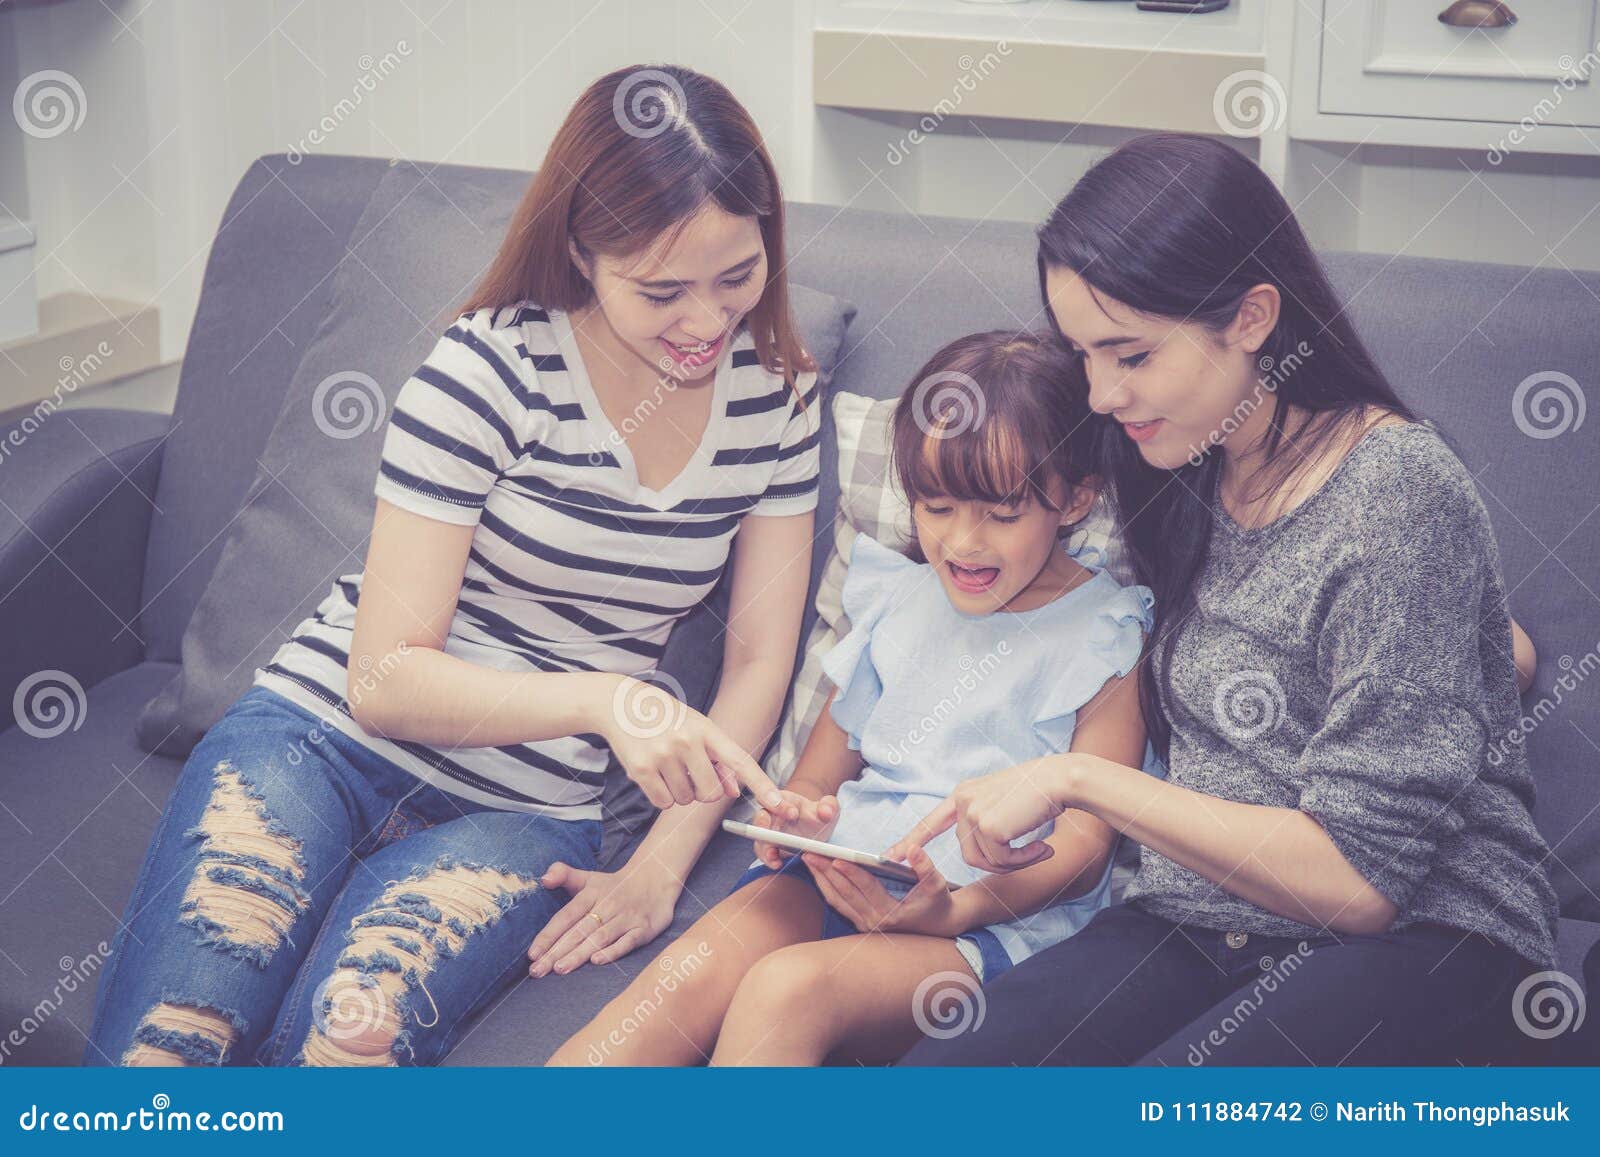 mother, aunt and kid having time together lerning with using tablet at home with relax and happy on couch